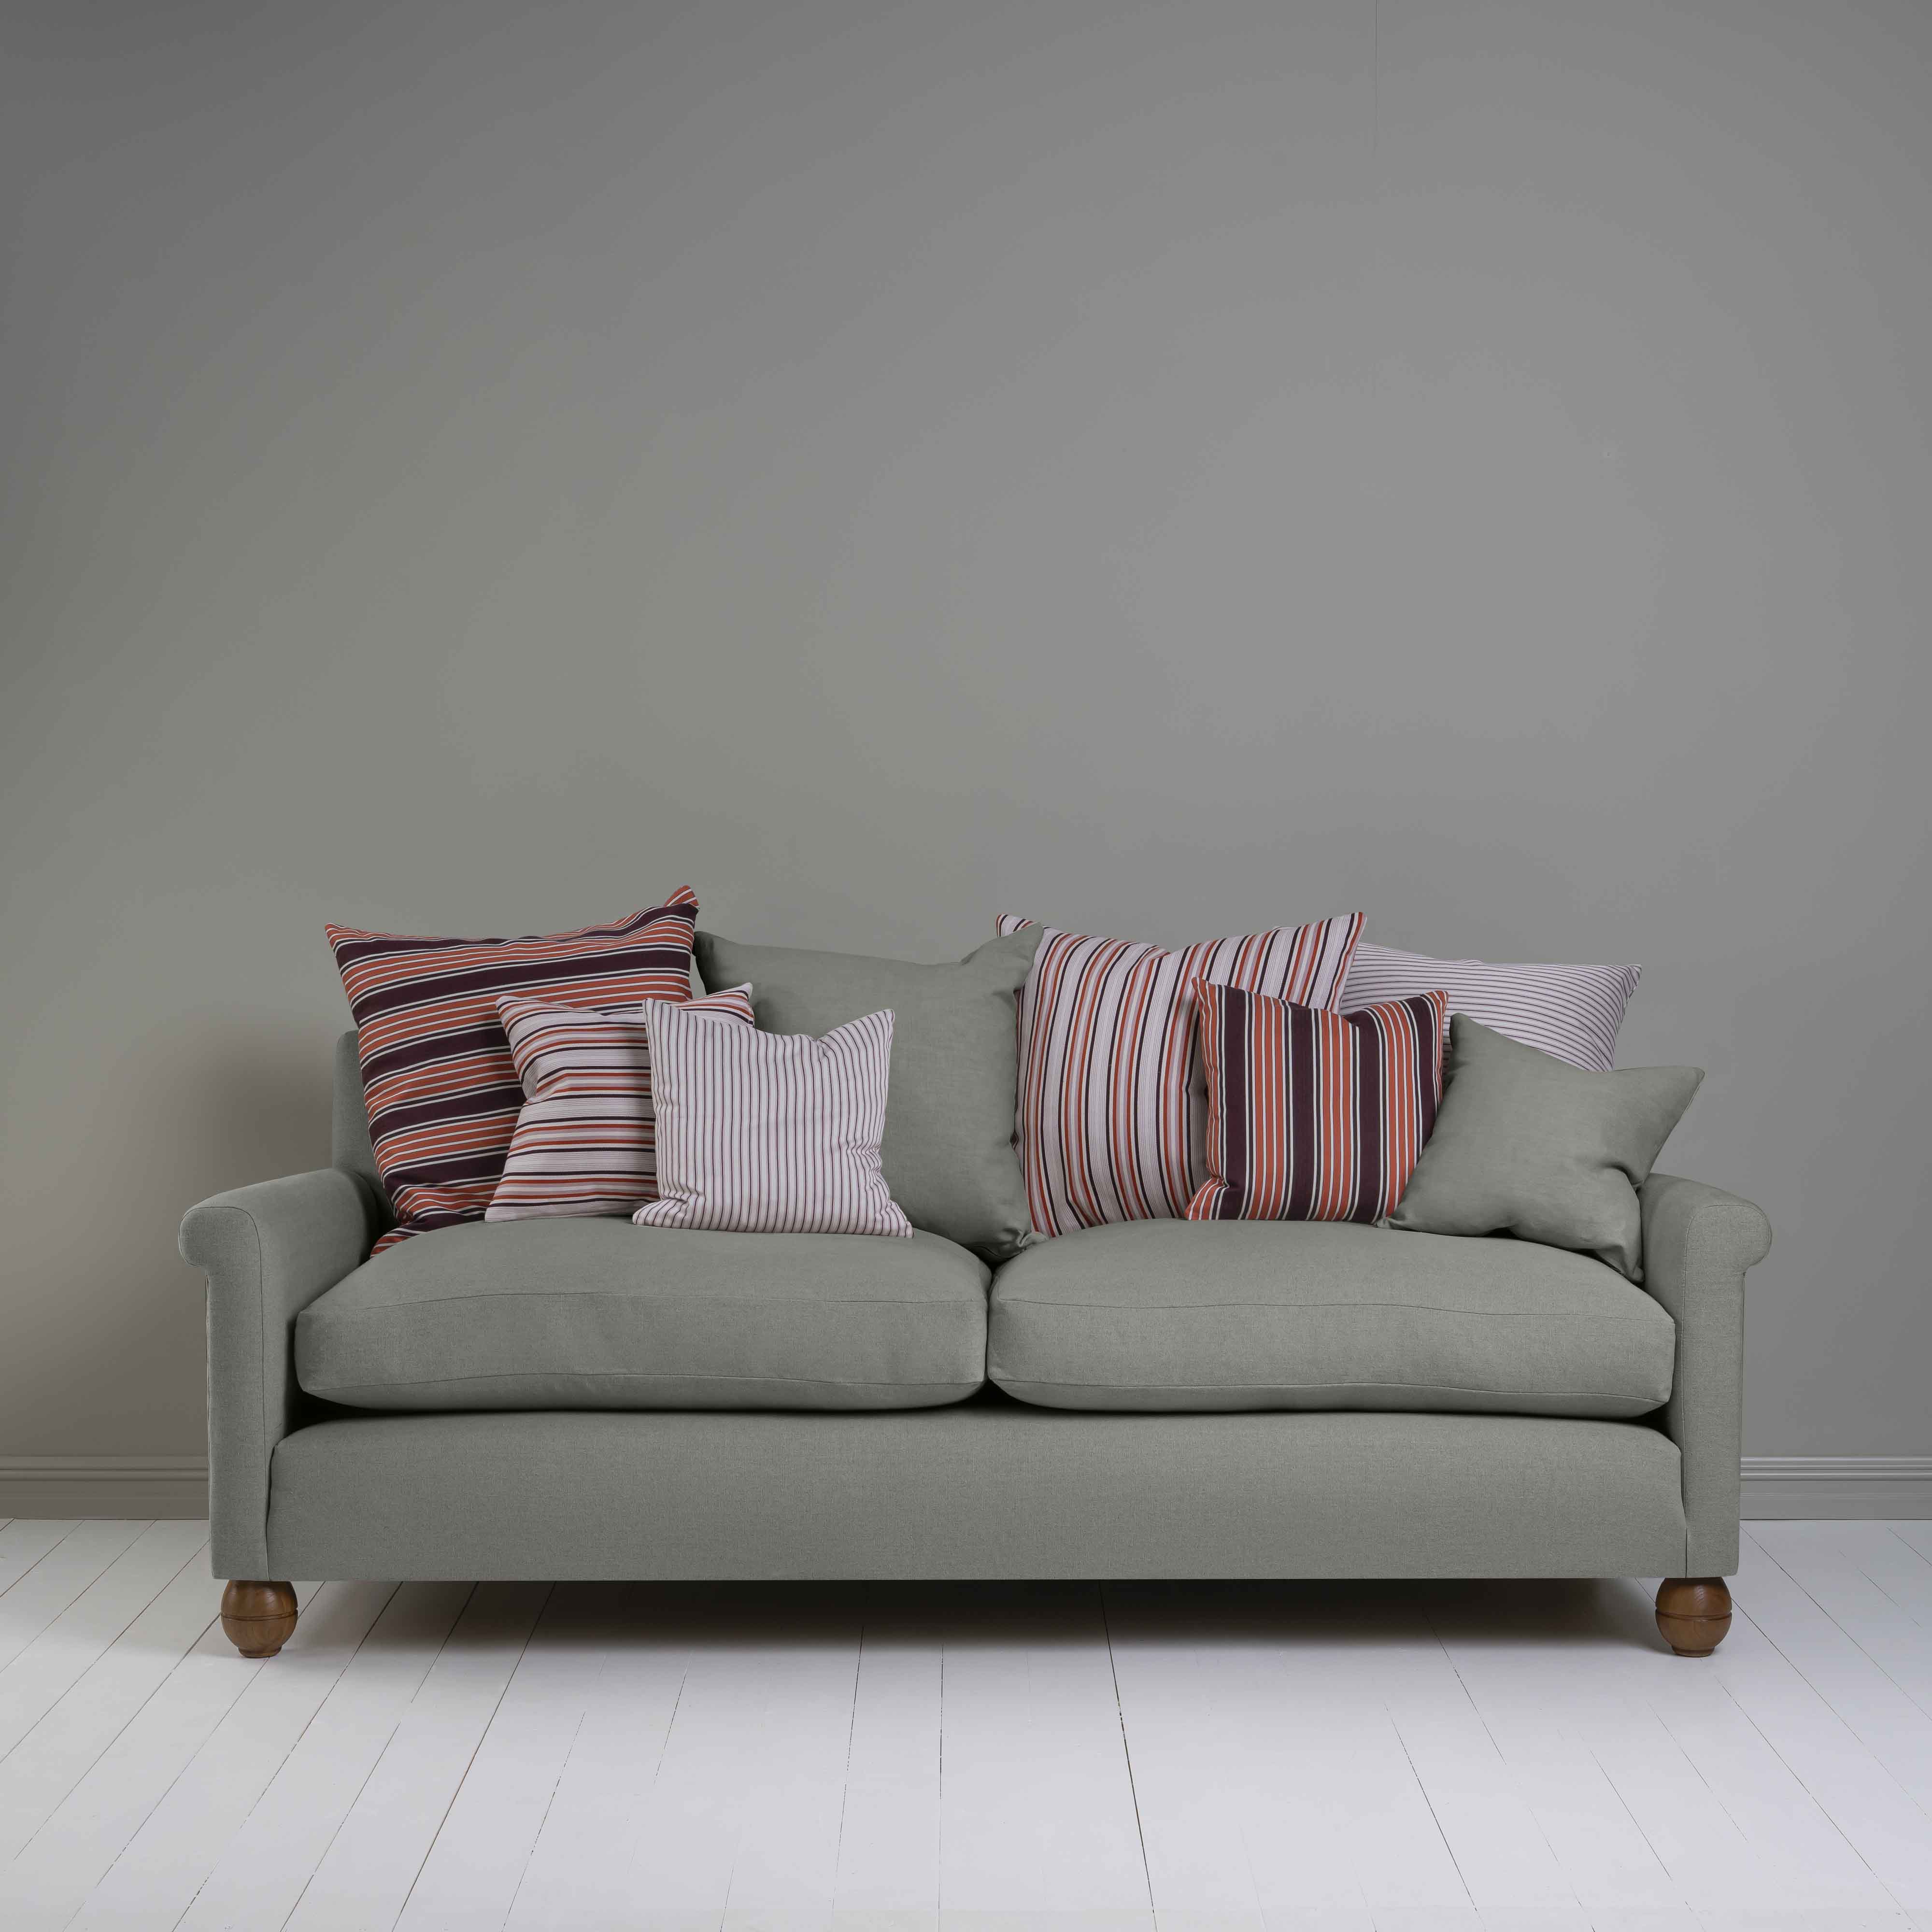  Idler 4 seater sofa in Laidback Linen Shadow 